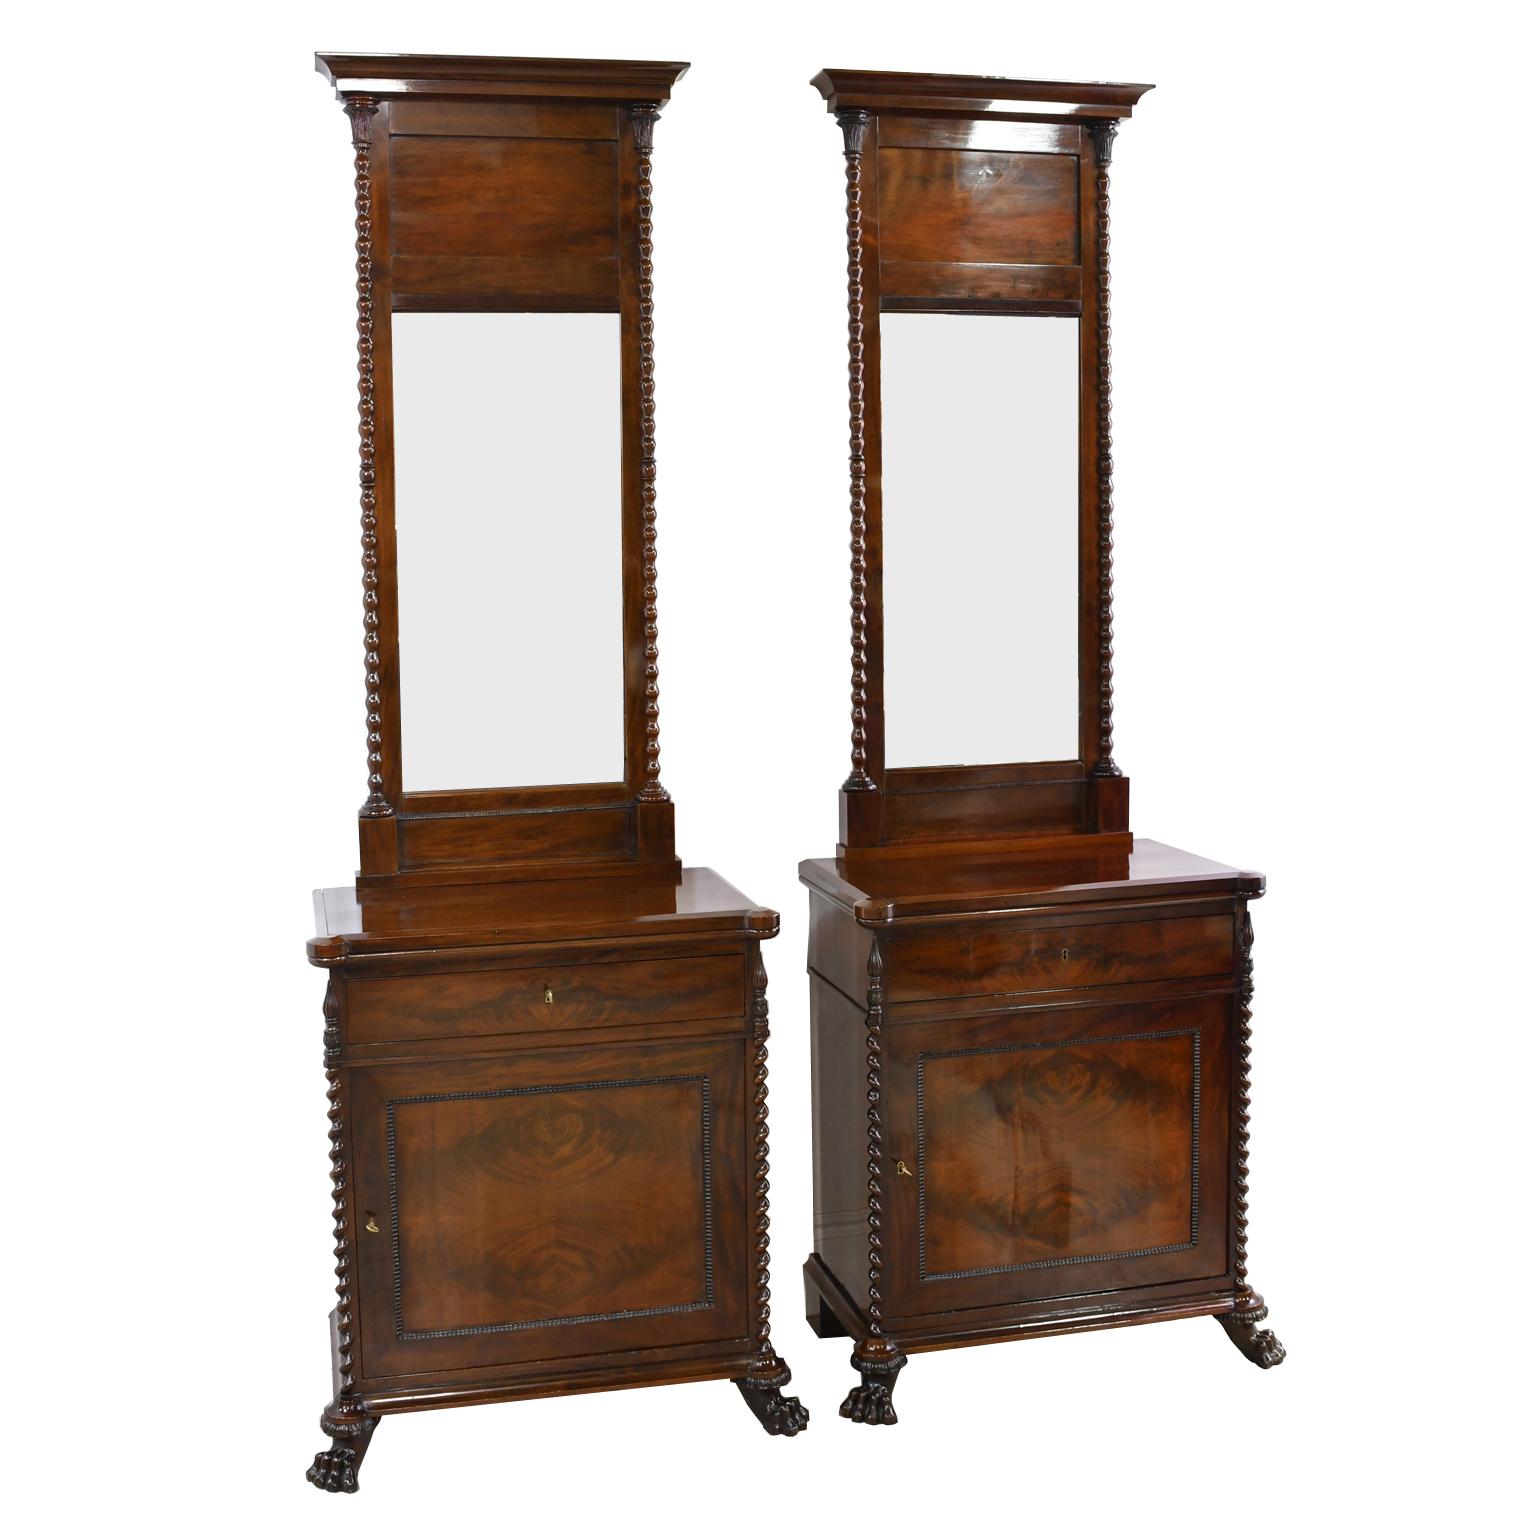 An exquisite pair of Scandinavian Biedermeier/ Empire console cabinets with matching mirrors in a dark, rich West Indies/ Cuban mahogany, Denmark, circa 1830. Sides of cabinets and mirrors are trimmed with twist turnings and capped with